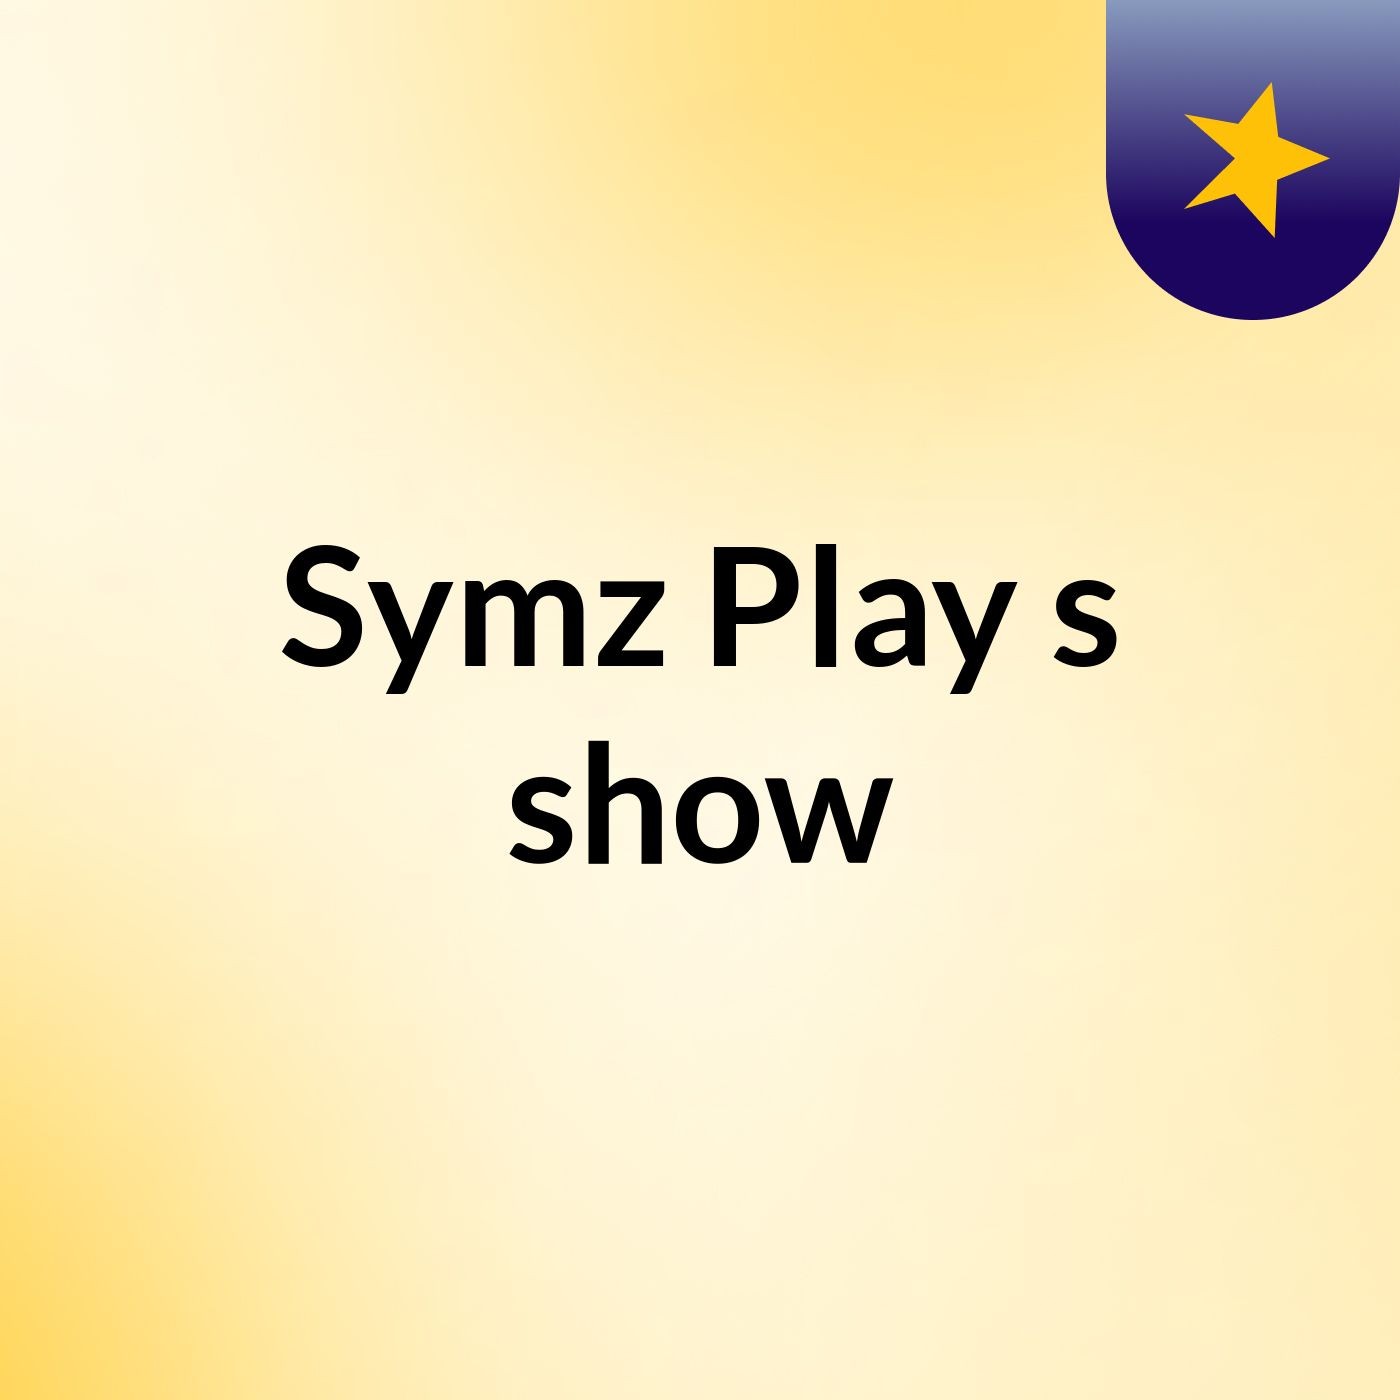 Symz Play's show